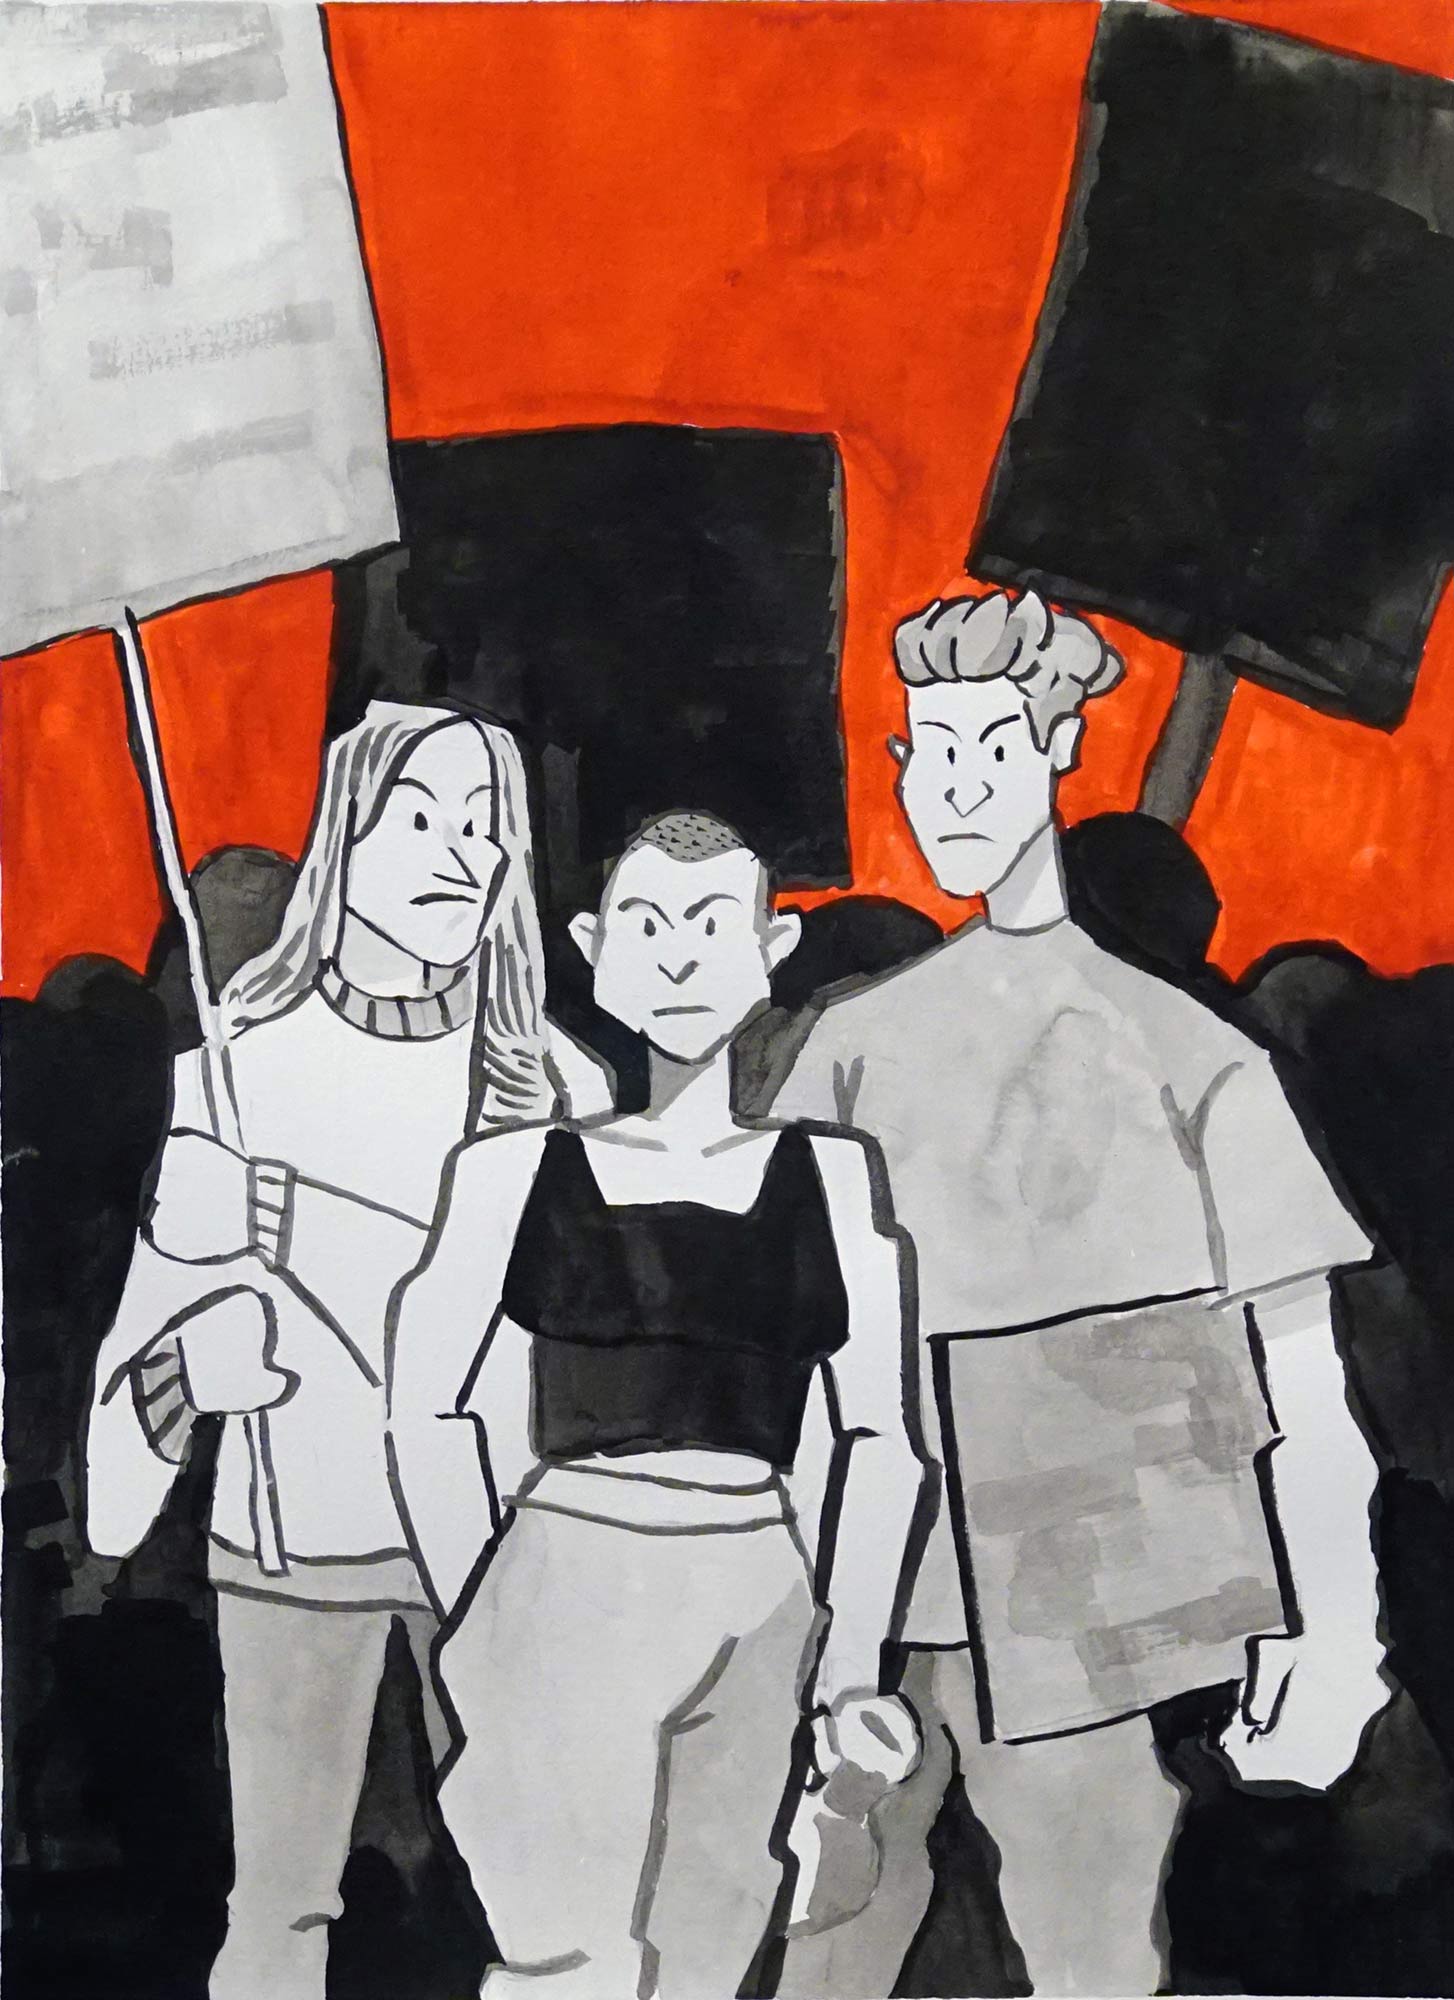 Three figures holding protest signs